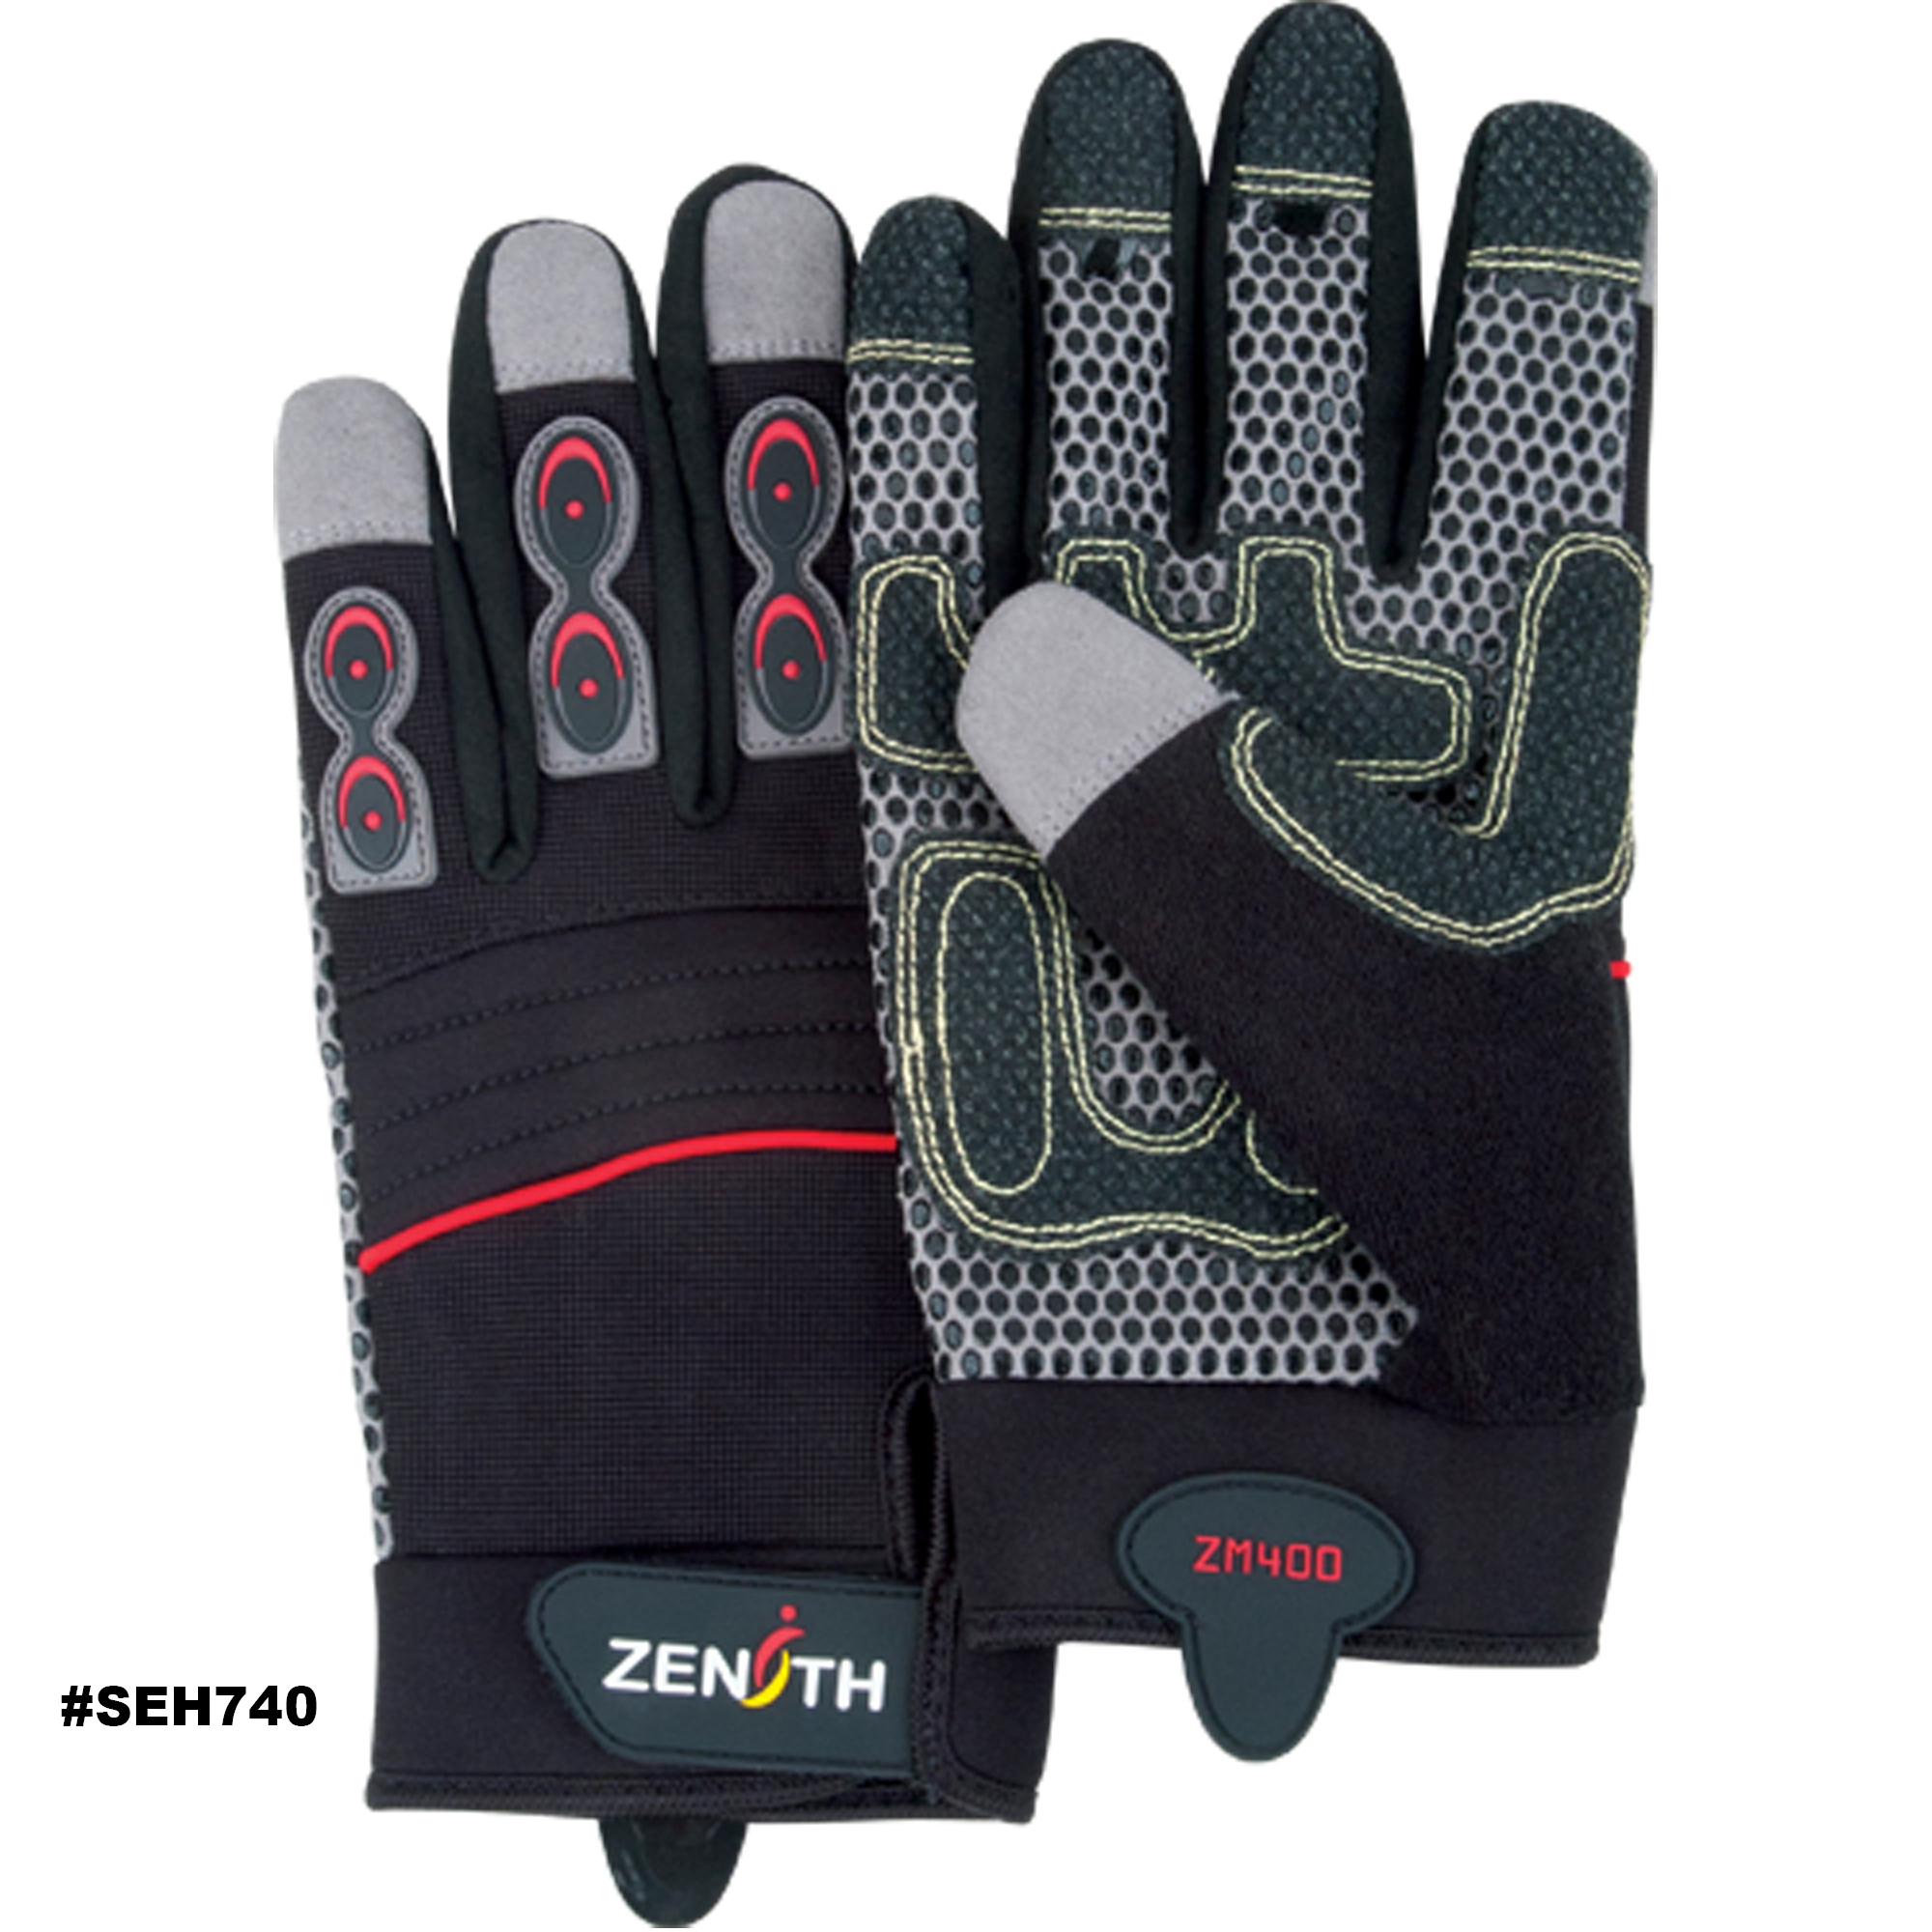 Zenith ZM400 Premium Mechanic Gloves, Synthetic Palm, Size Large Model: SEH740